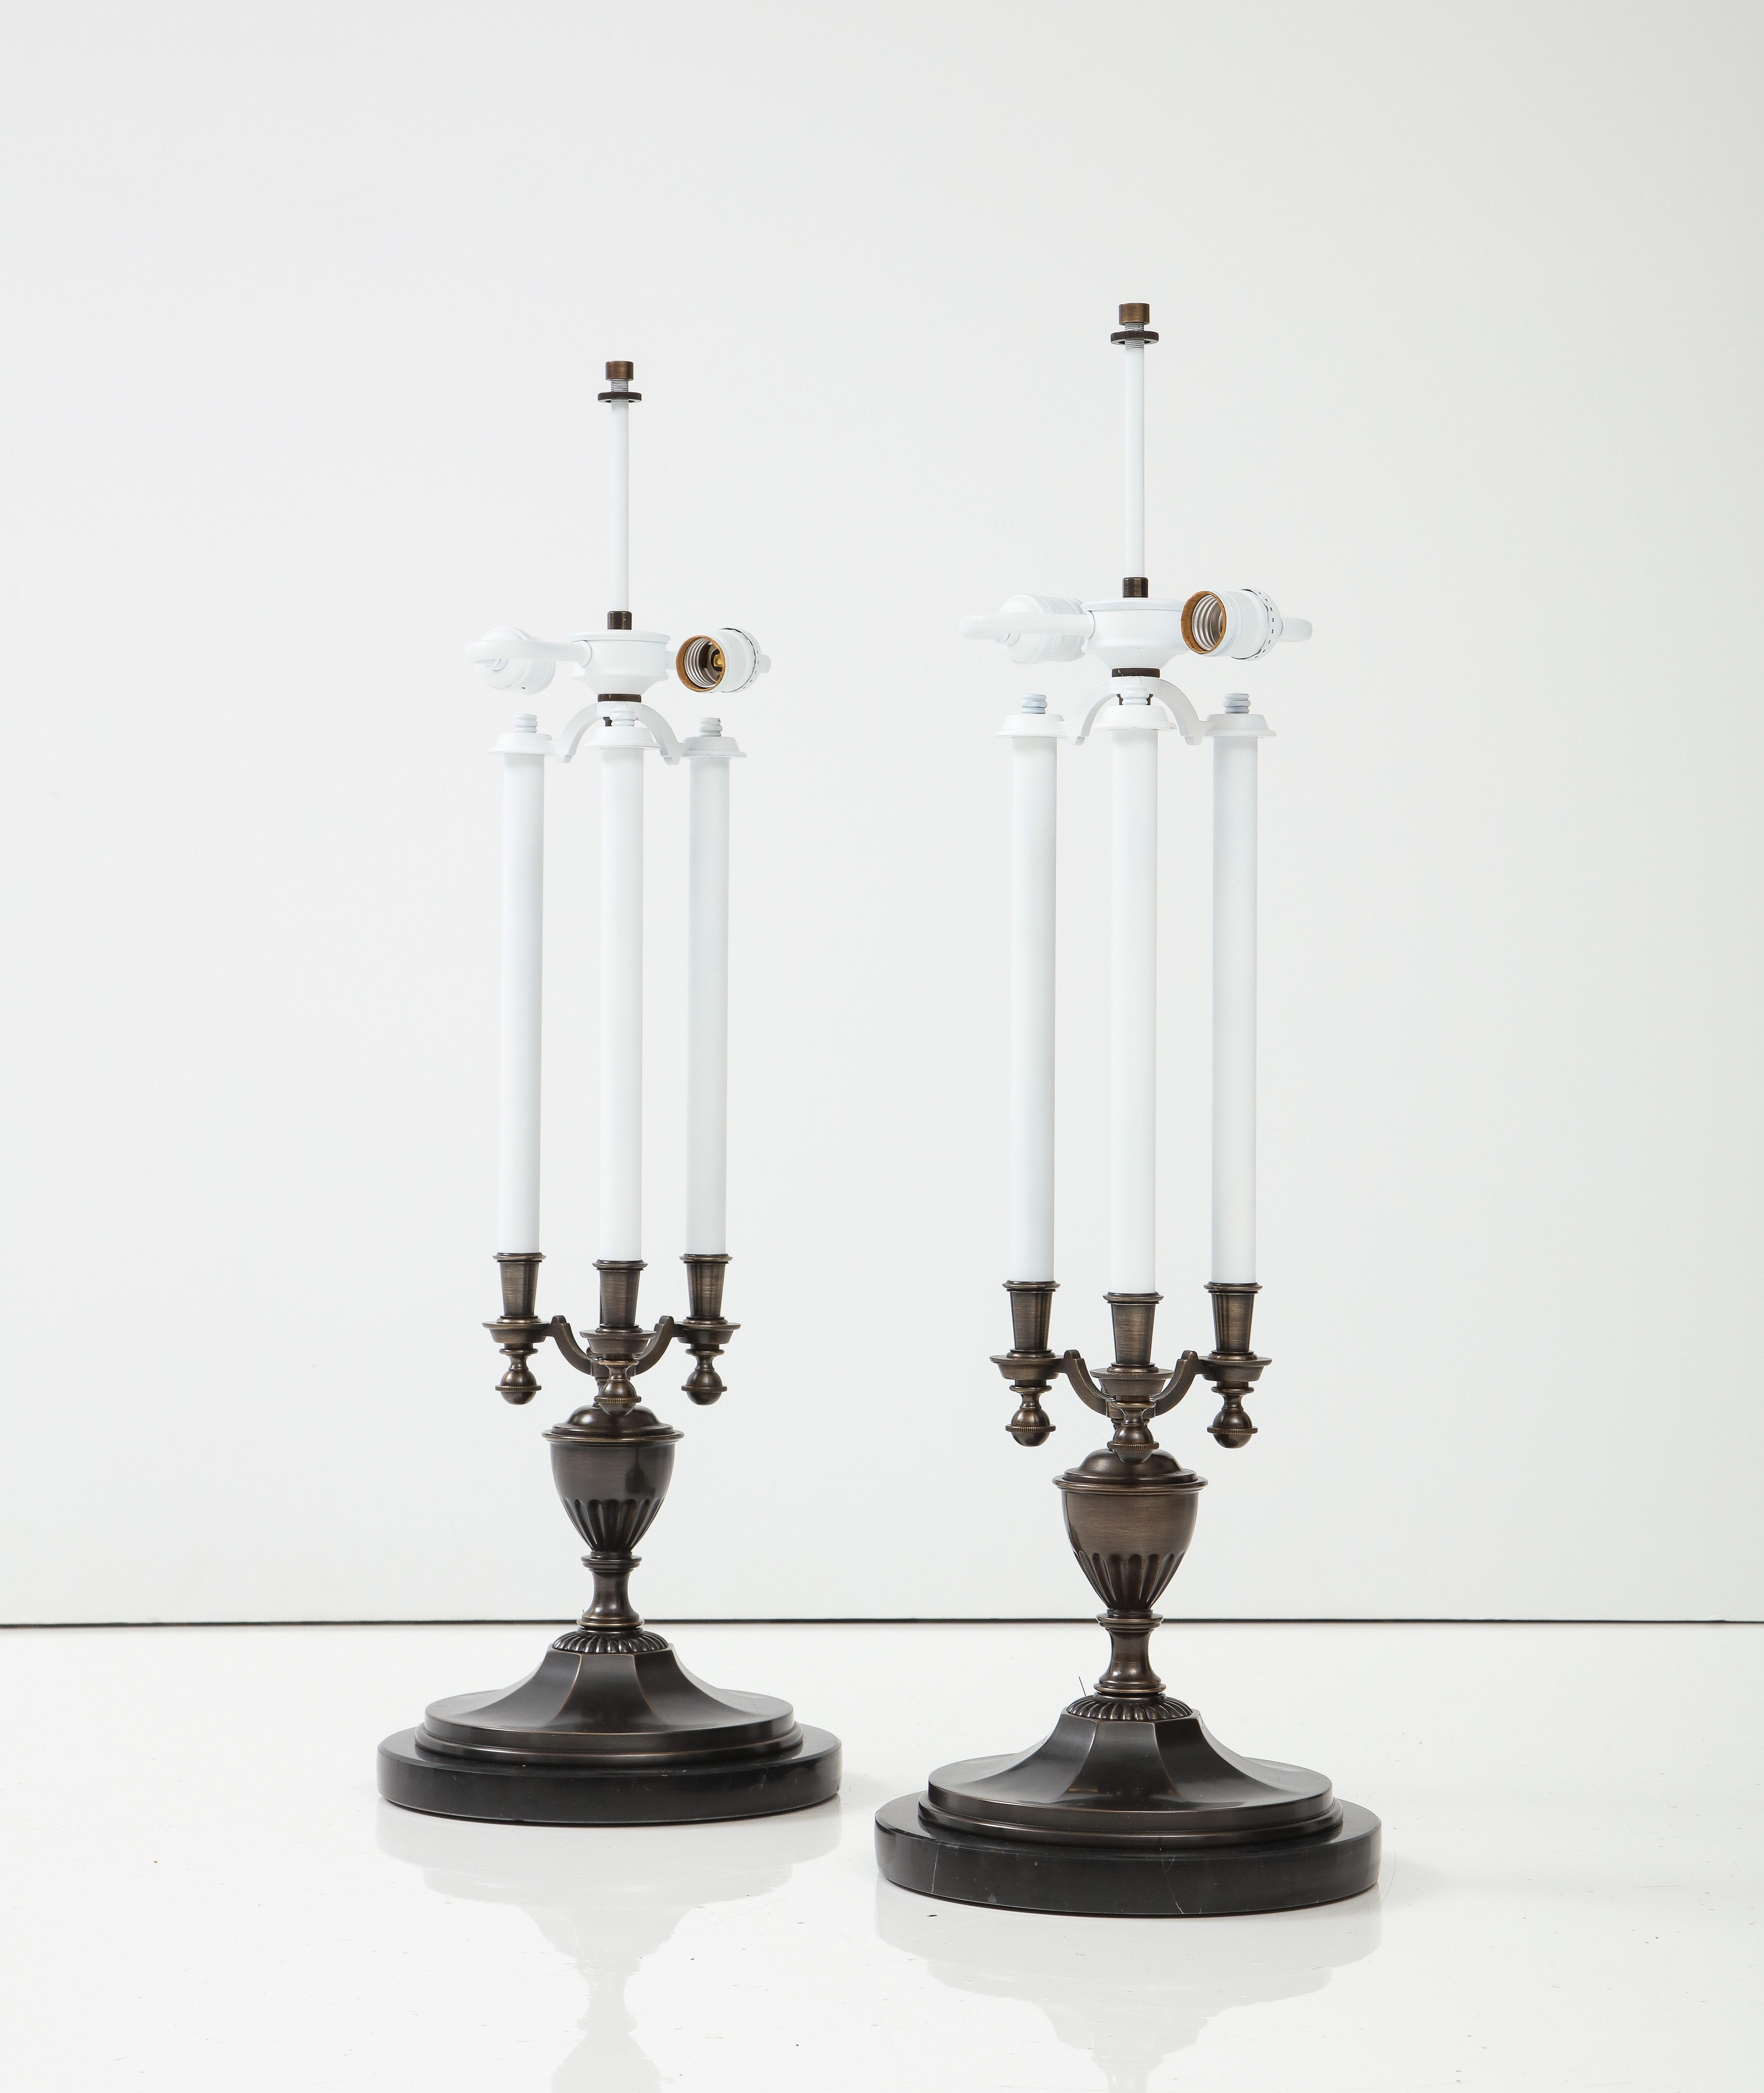 Traditional candelabra style lamps an a modern bronze finish. Each lamp has 3 enameled metal candles with sockets using candelabra type bulbs. Lamps sit on black marble disc bases. Rewired for use in the USA.